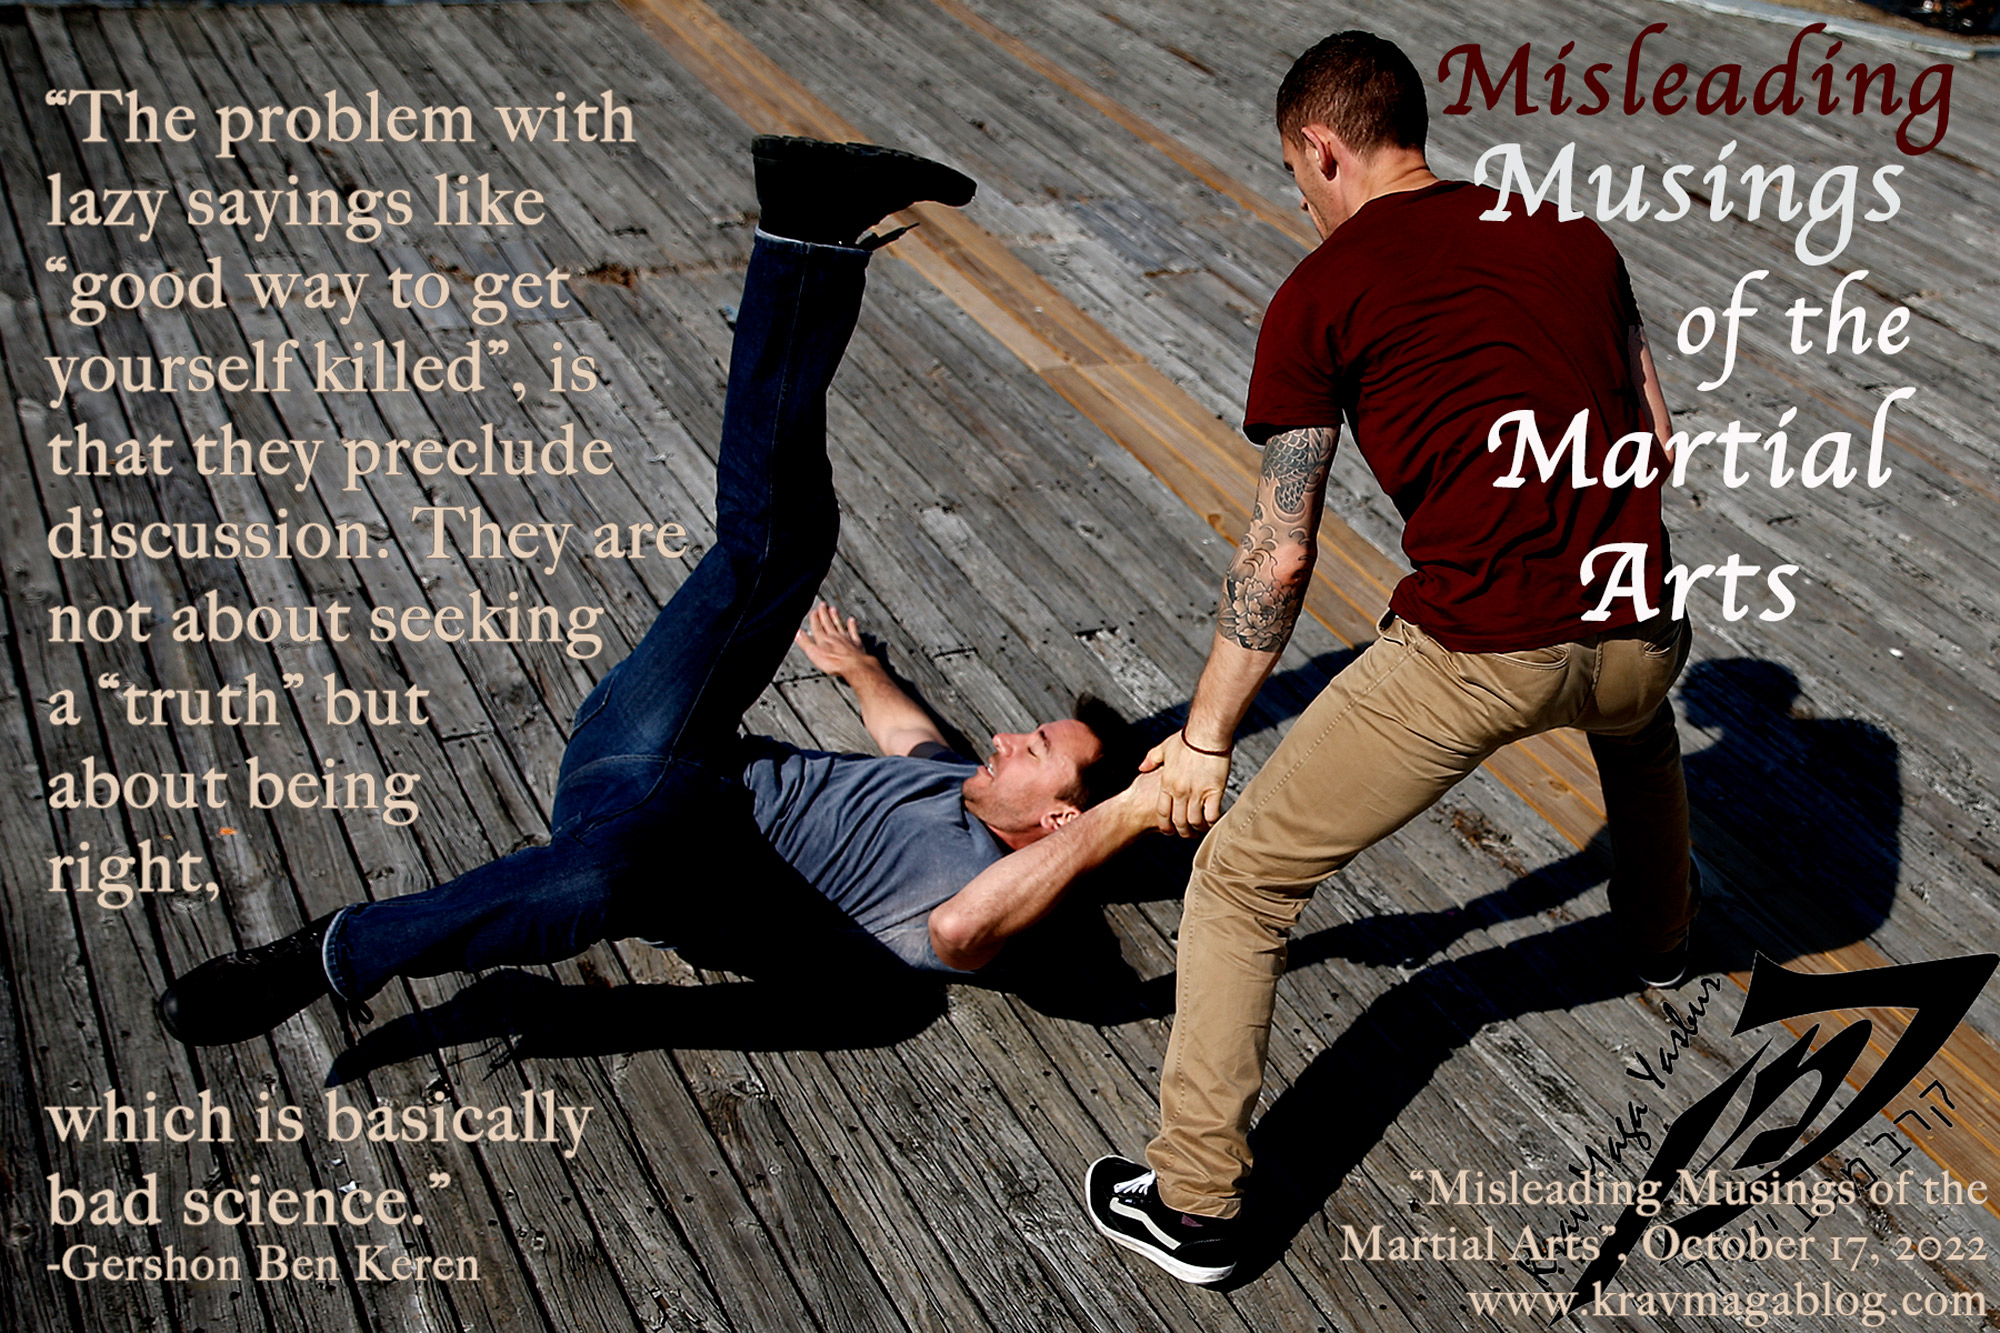 Blog About Misleading Musings of the Martial Arts